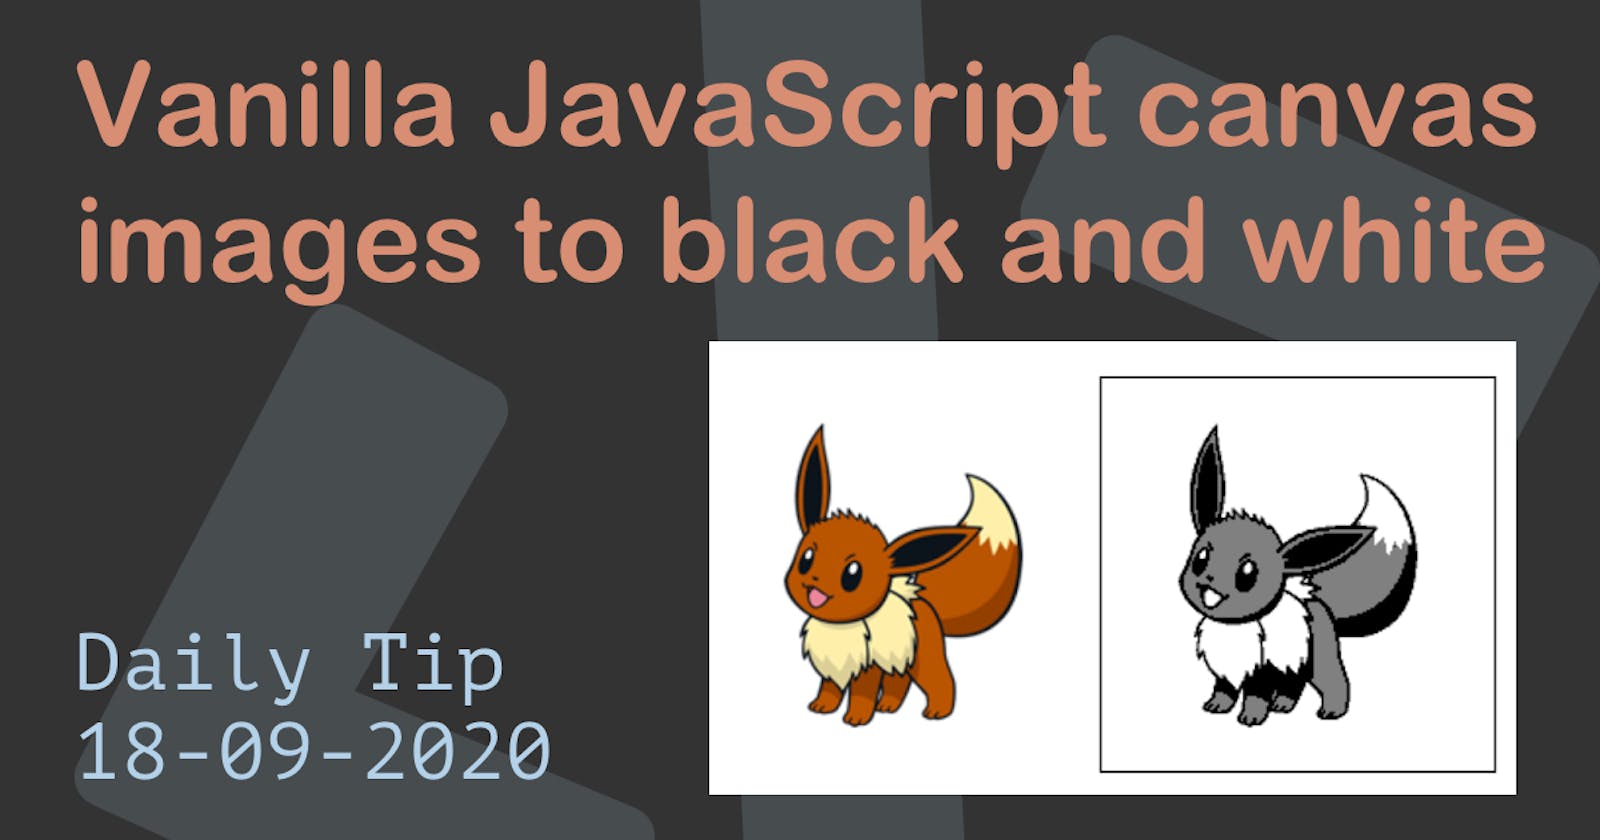 Vanilla JavaScript canvas images to black and white